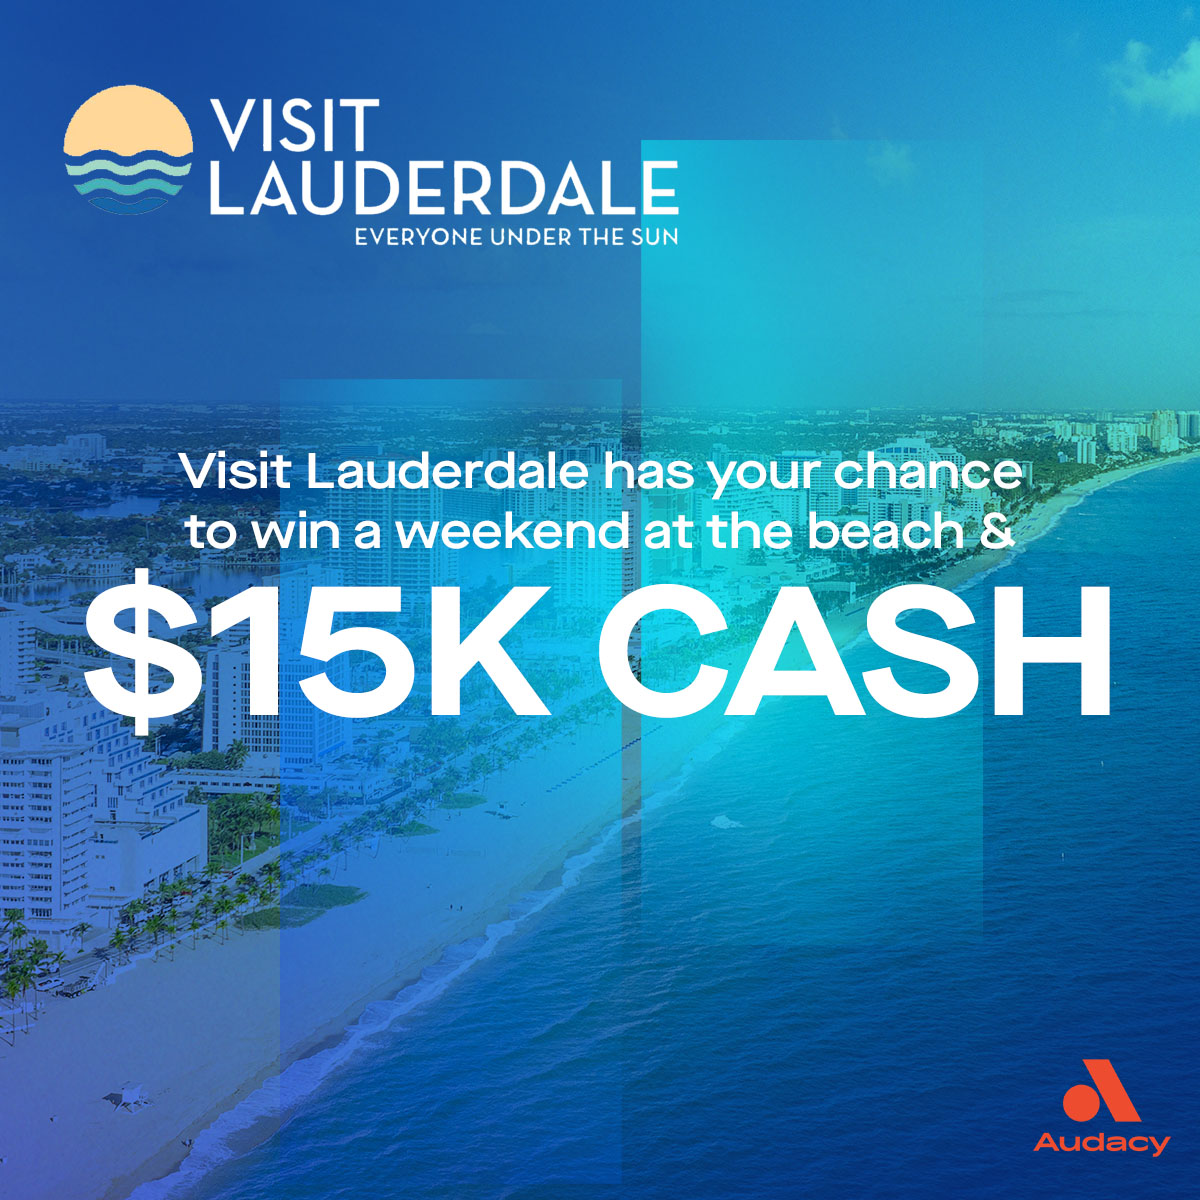 ENTER NOW FOR YOUR CHANCE TO WIN THIS UNFORGETTABLE FORT LAUDERDALE VACATION AT bit.ly/3TU1gG4. YOUR CHANCE TO WIN A PREMIUM FORT LAUDERDALE VACATION INCLUDING ROUND TRIP AIRFARE, A THREE NIGHT HOTEL STAY AND FIFTEEN THOUSAND DOLLARS CASH. 🌴🌴🌴